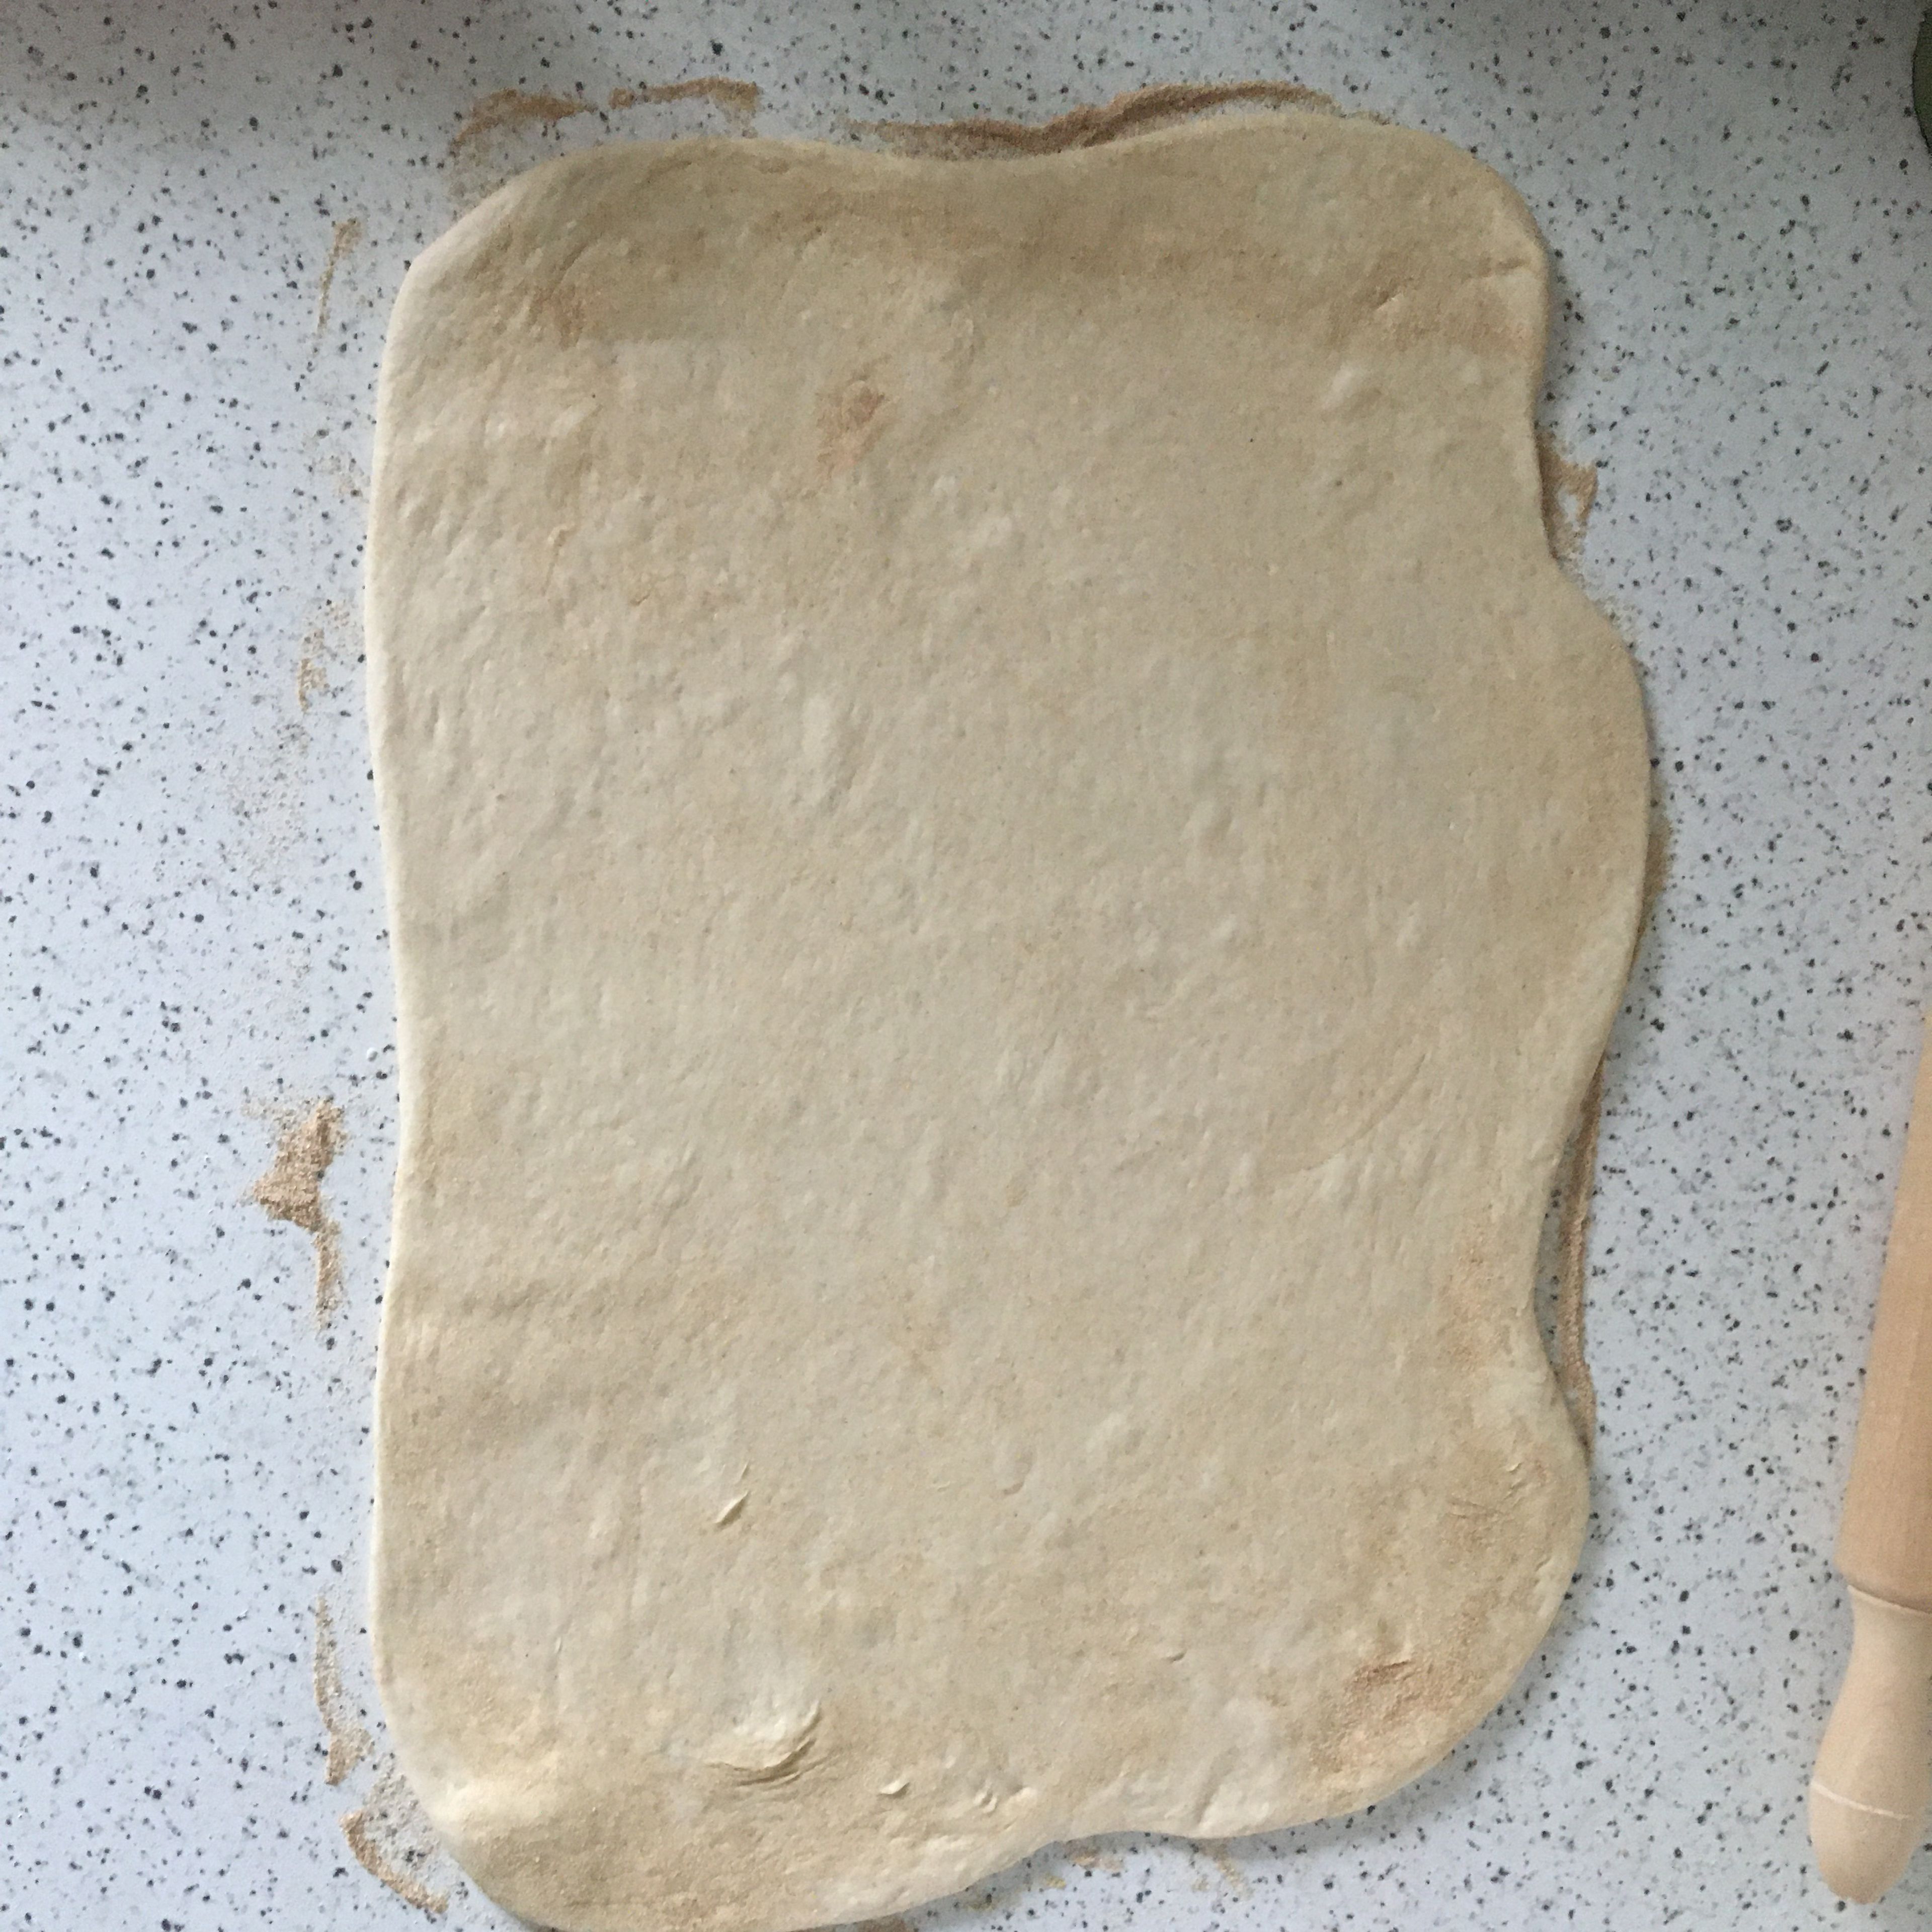 When the dough has risen and doubled in size, carefully transfer it onto a floured work surface and fold for a few times. With the help of a rolling pin and your hands, flatten the dough into a large rectangle.